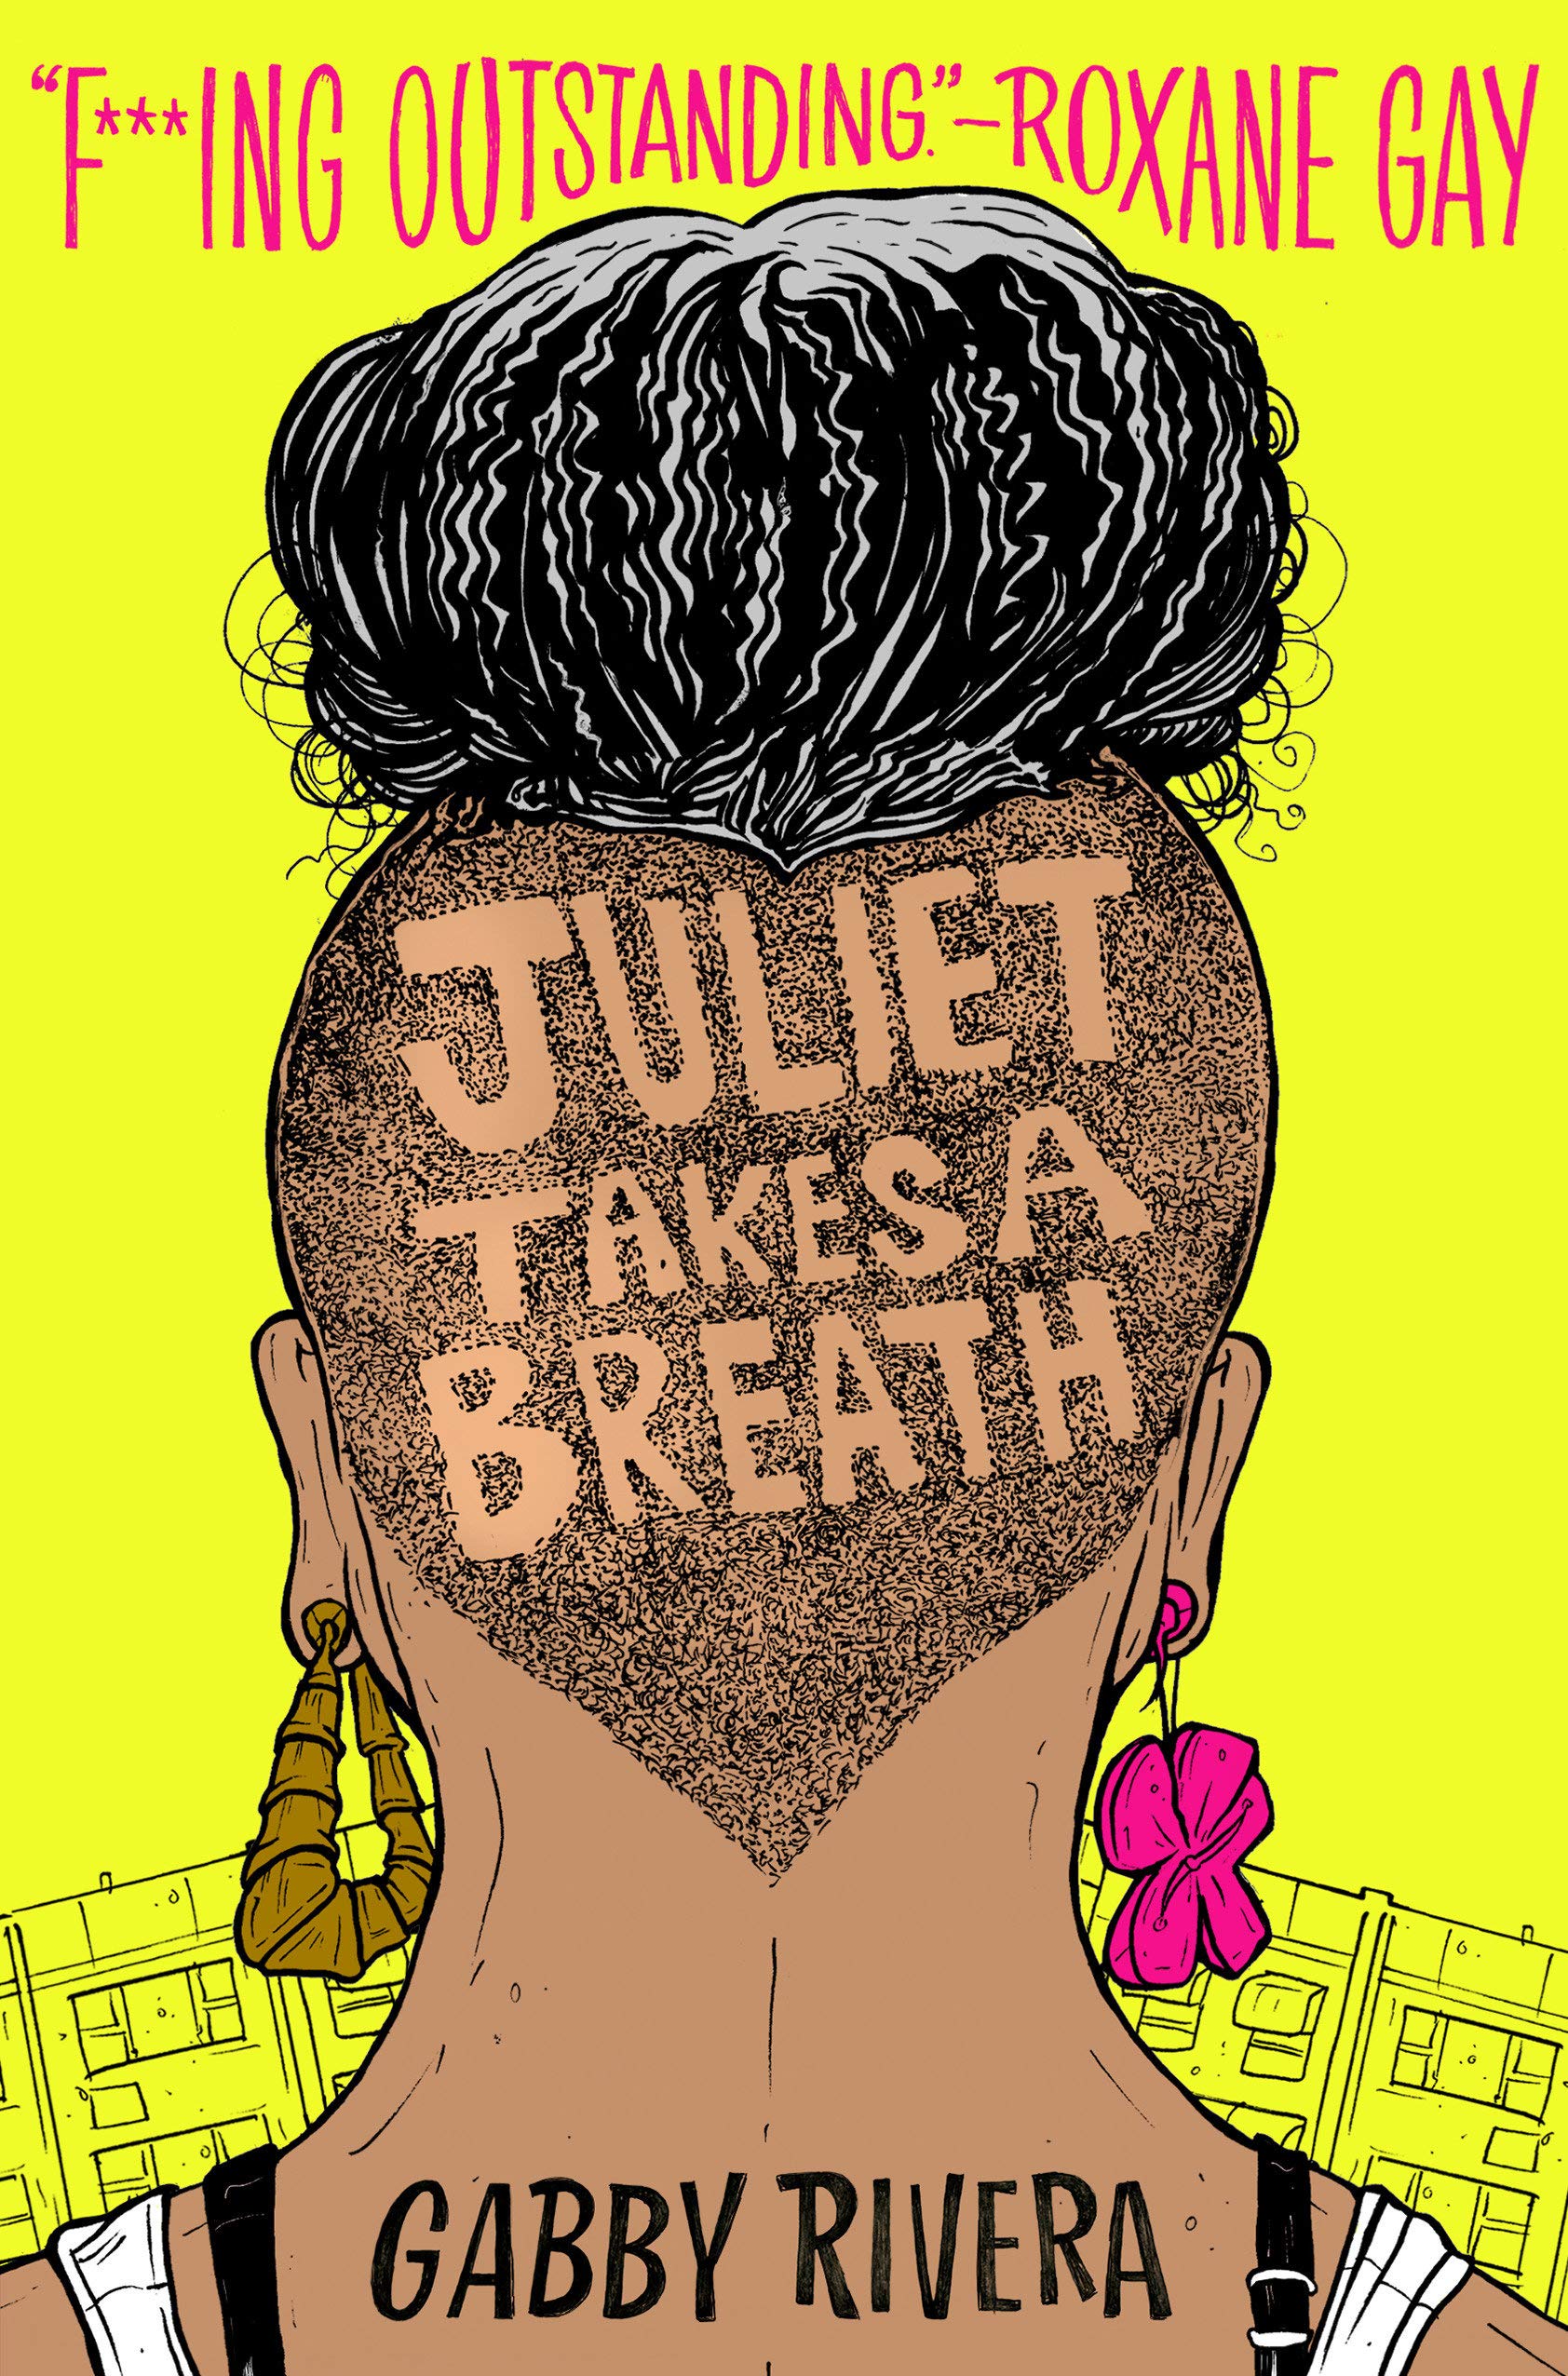 Hardback cover of Juliet Takes a Breath of the back of protagonist Juliet's head, the title shaved into her undercut with a bright yellow background.